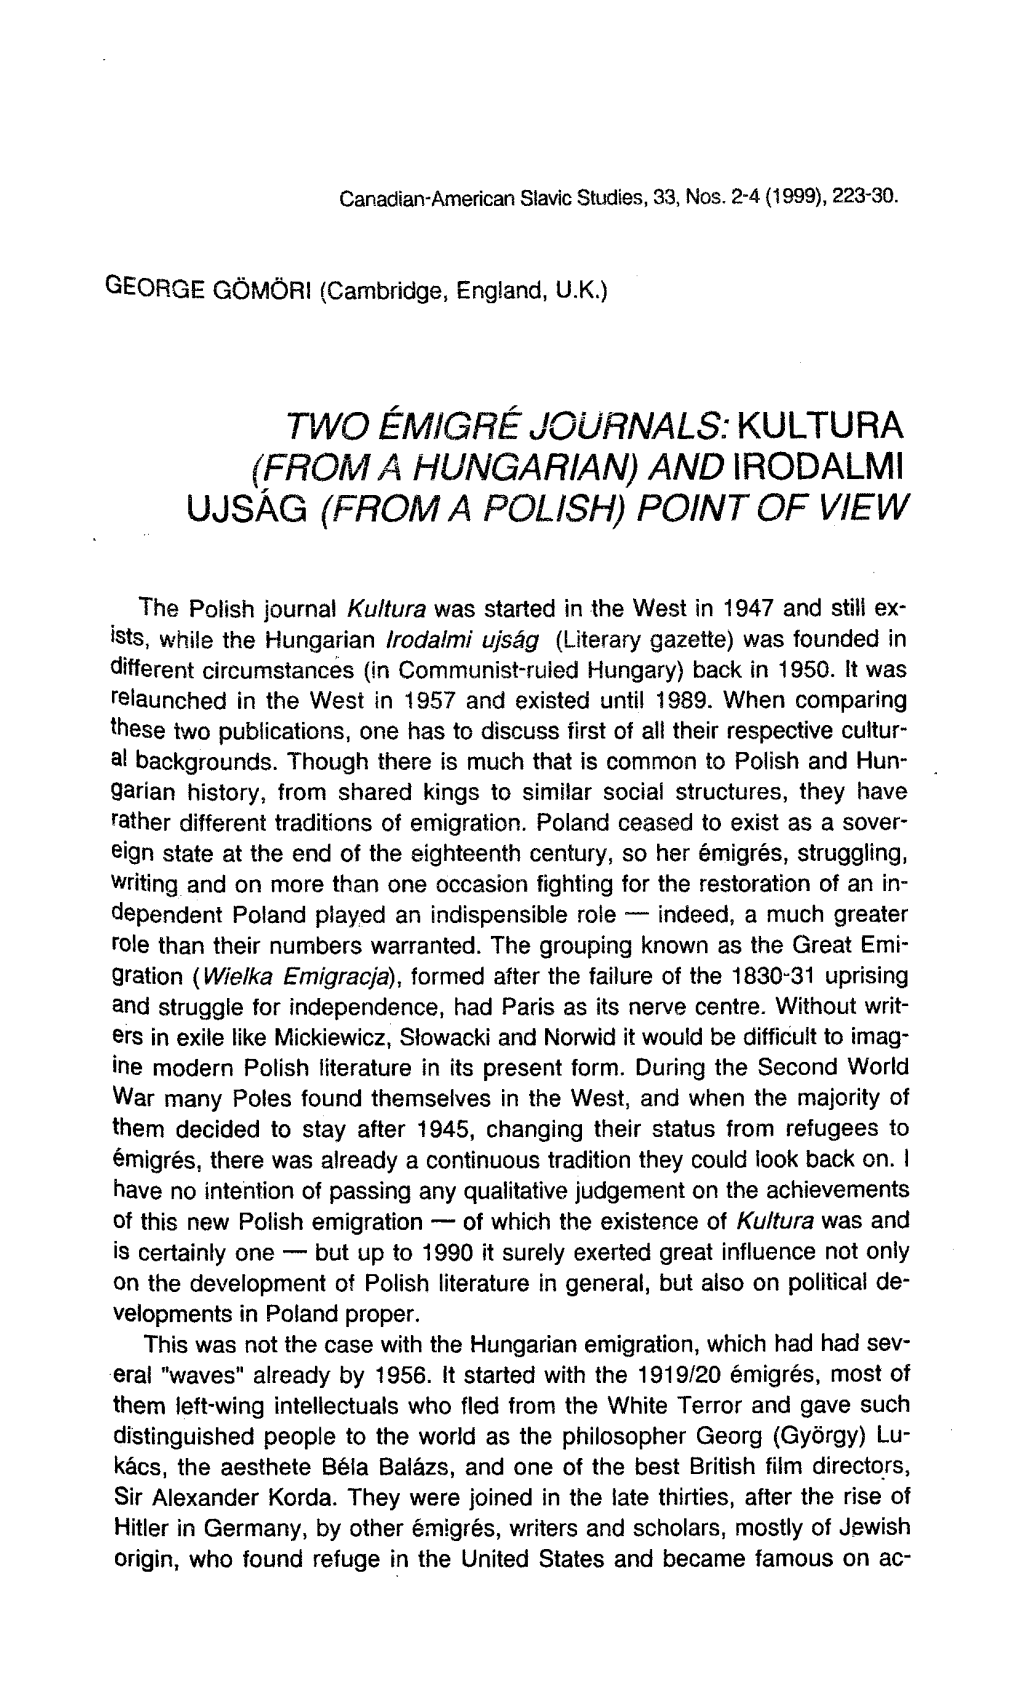 Two Ã Migrã Journals: Kultura (From a Hungarian